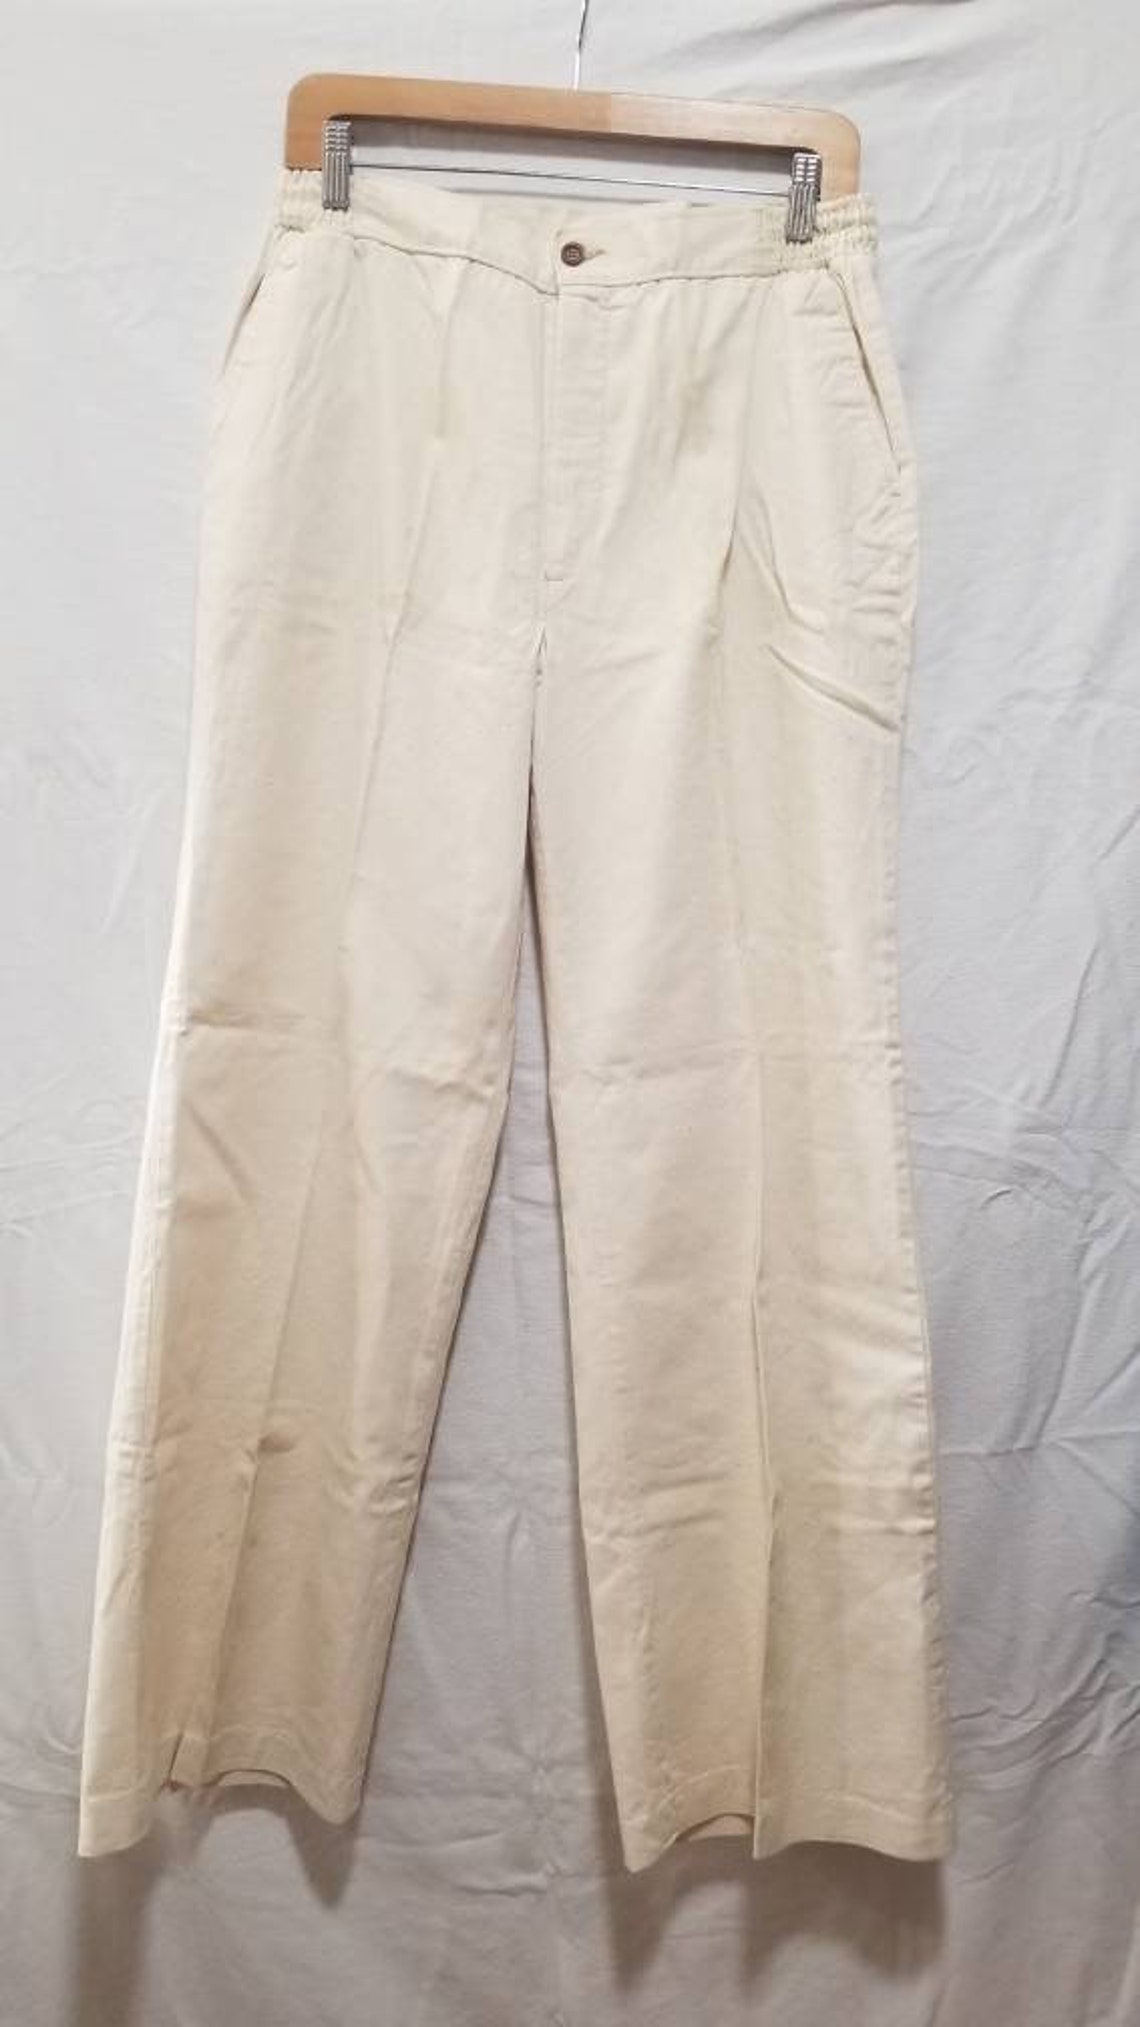 Vintage H.i.s. Cotton Cream Colored Leisure Pants NWT - Etsy